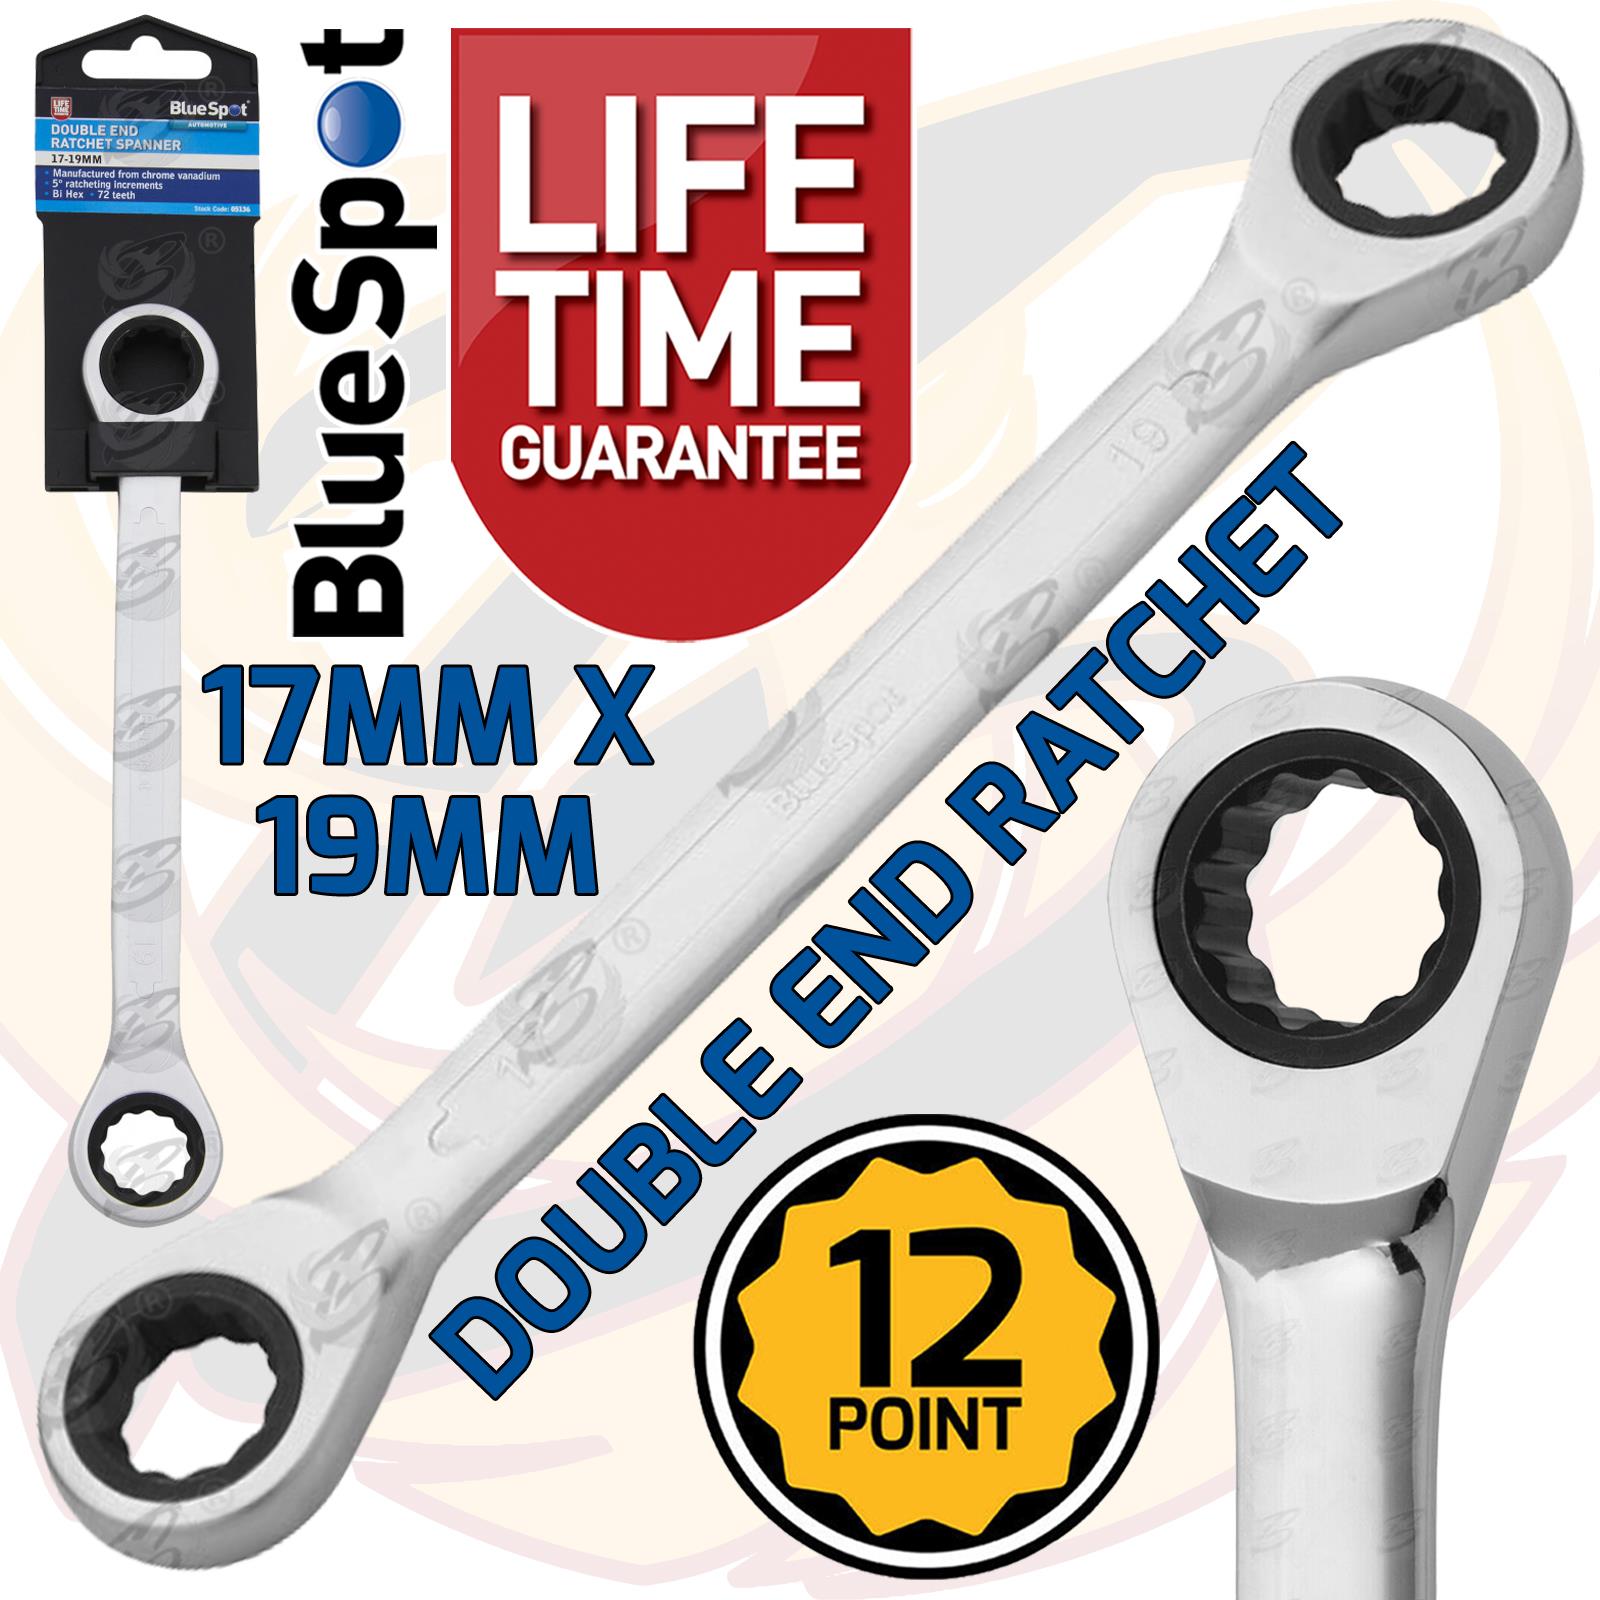 BLUESPOT 17MM x 19MM 72 TOOTH DOUBLE ENDED RATCHET SPANNER